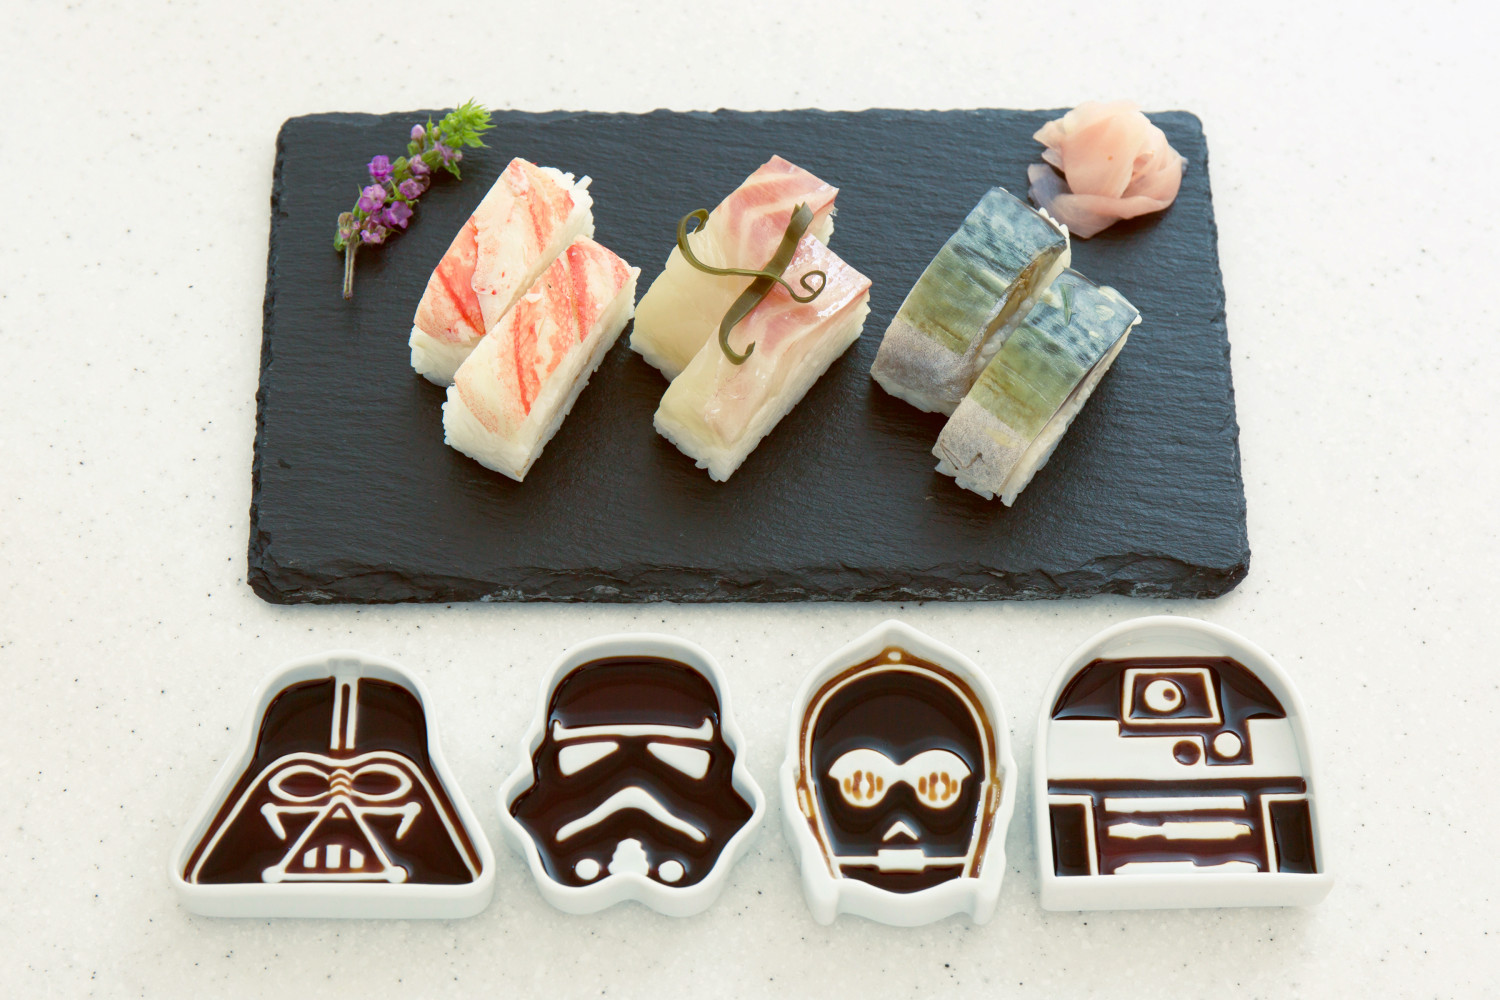 Giveaway : Japanese Craftsmanship Meets Star Wars!  Unique Arita-yaki Soy Sauce Dishes